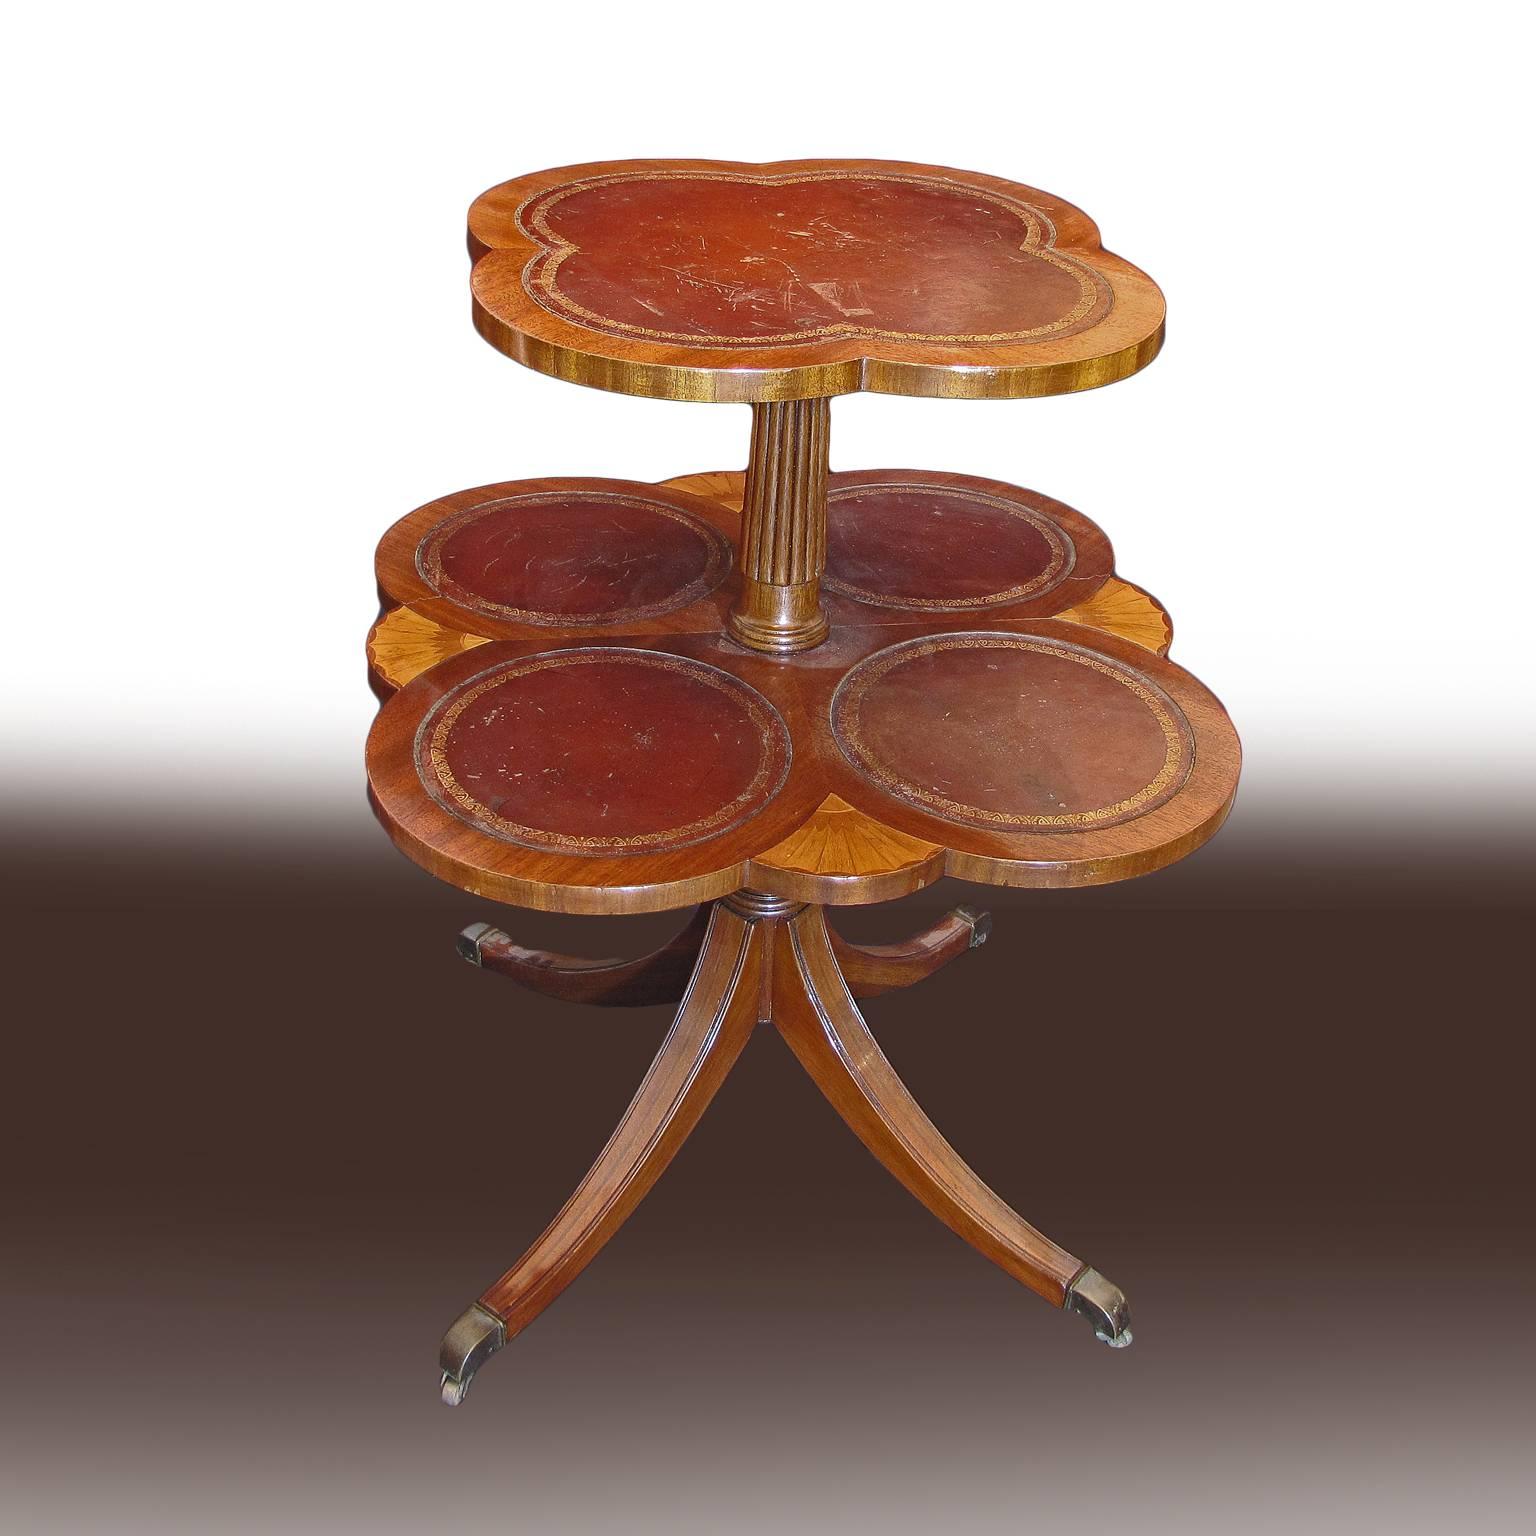 A beautiful pair of typical English style two-tier side tables in mahogany wood, with a beautiful leather lined quatrefoil tabletop and veneered Rosewood details. The tables rest on a central column of mahogany wood, which is supported by four saber